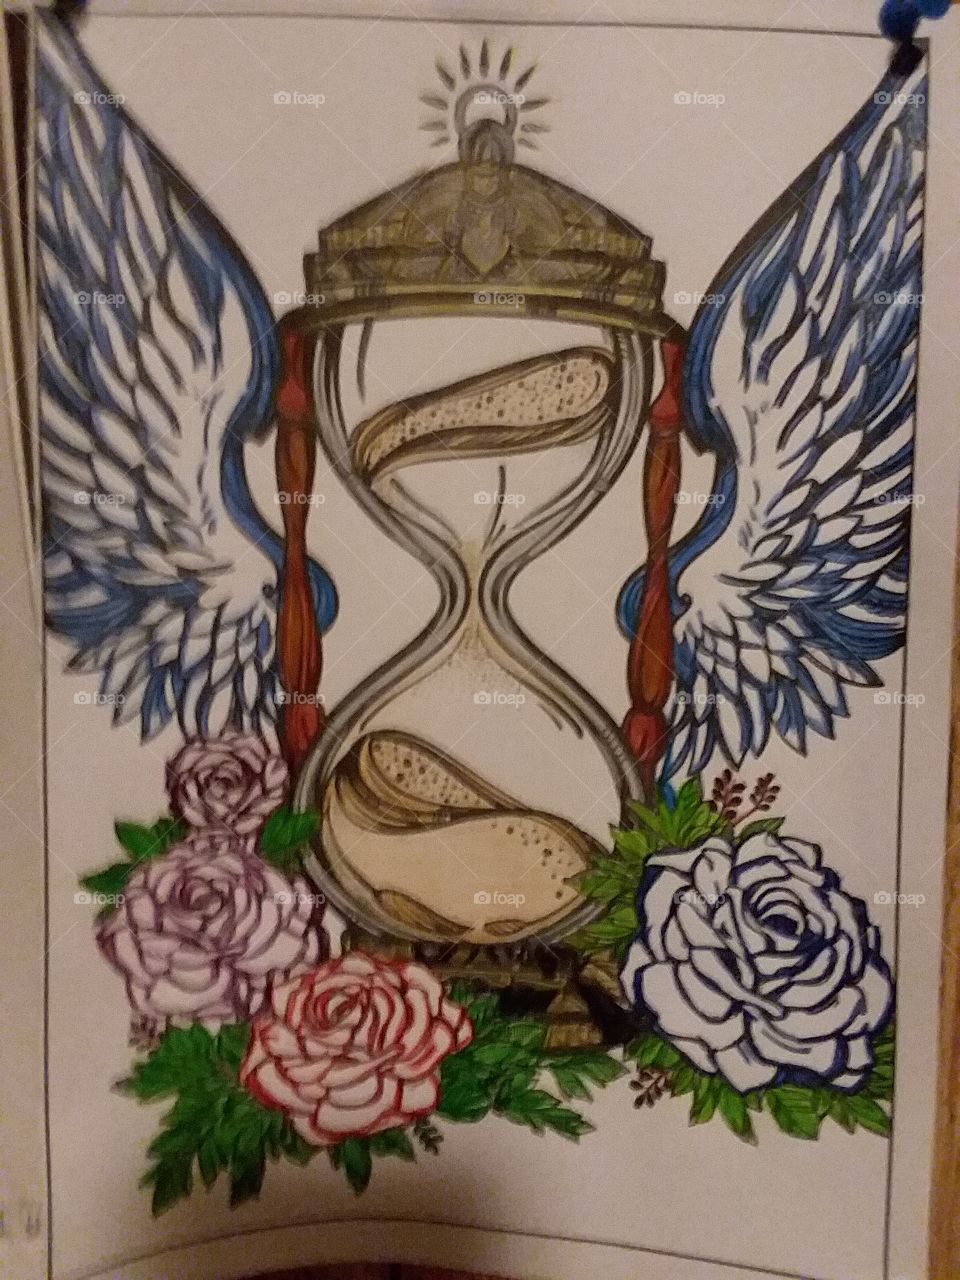 the sands in the hourglass symbolize time & how quickly it can go by